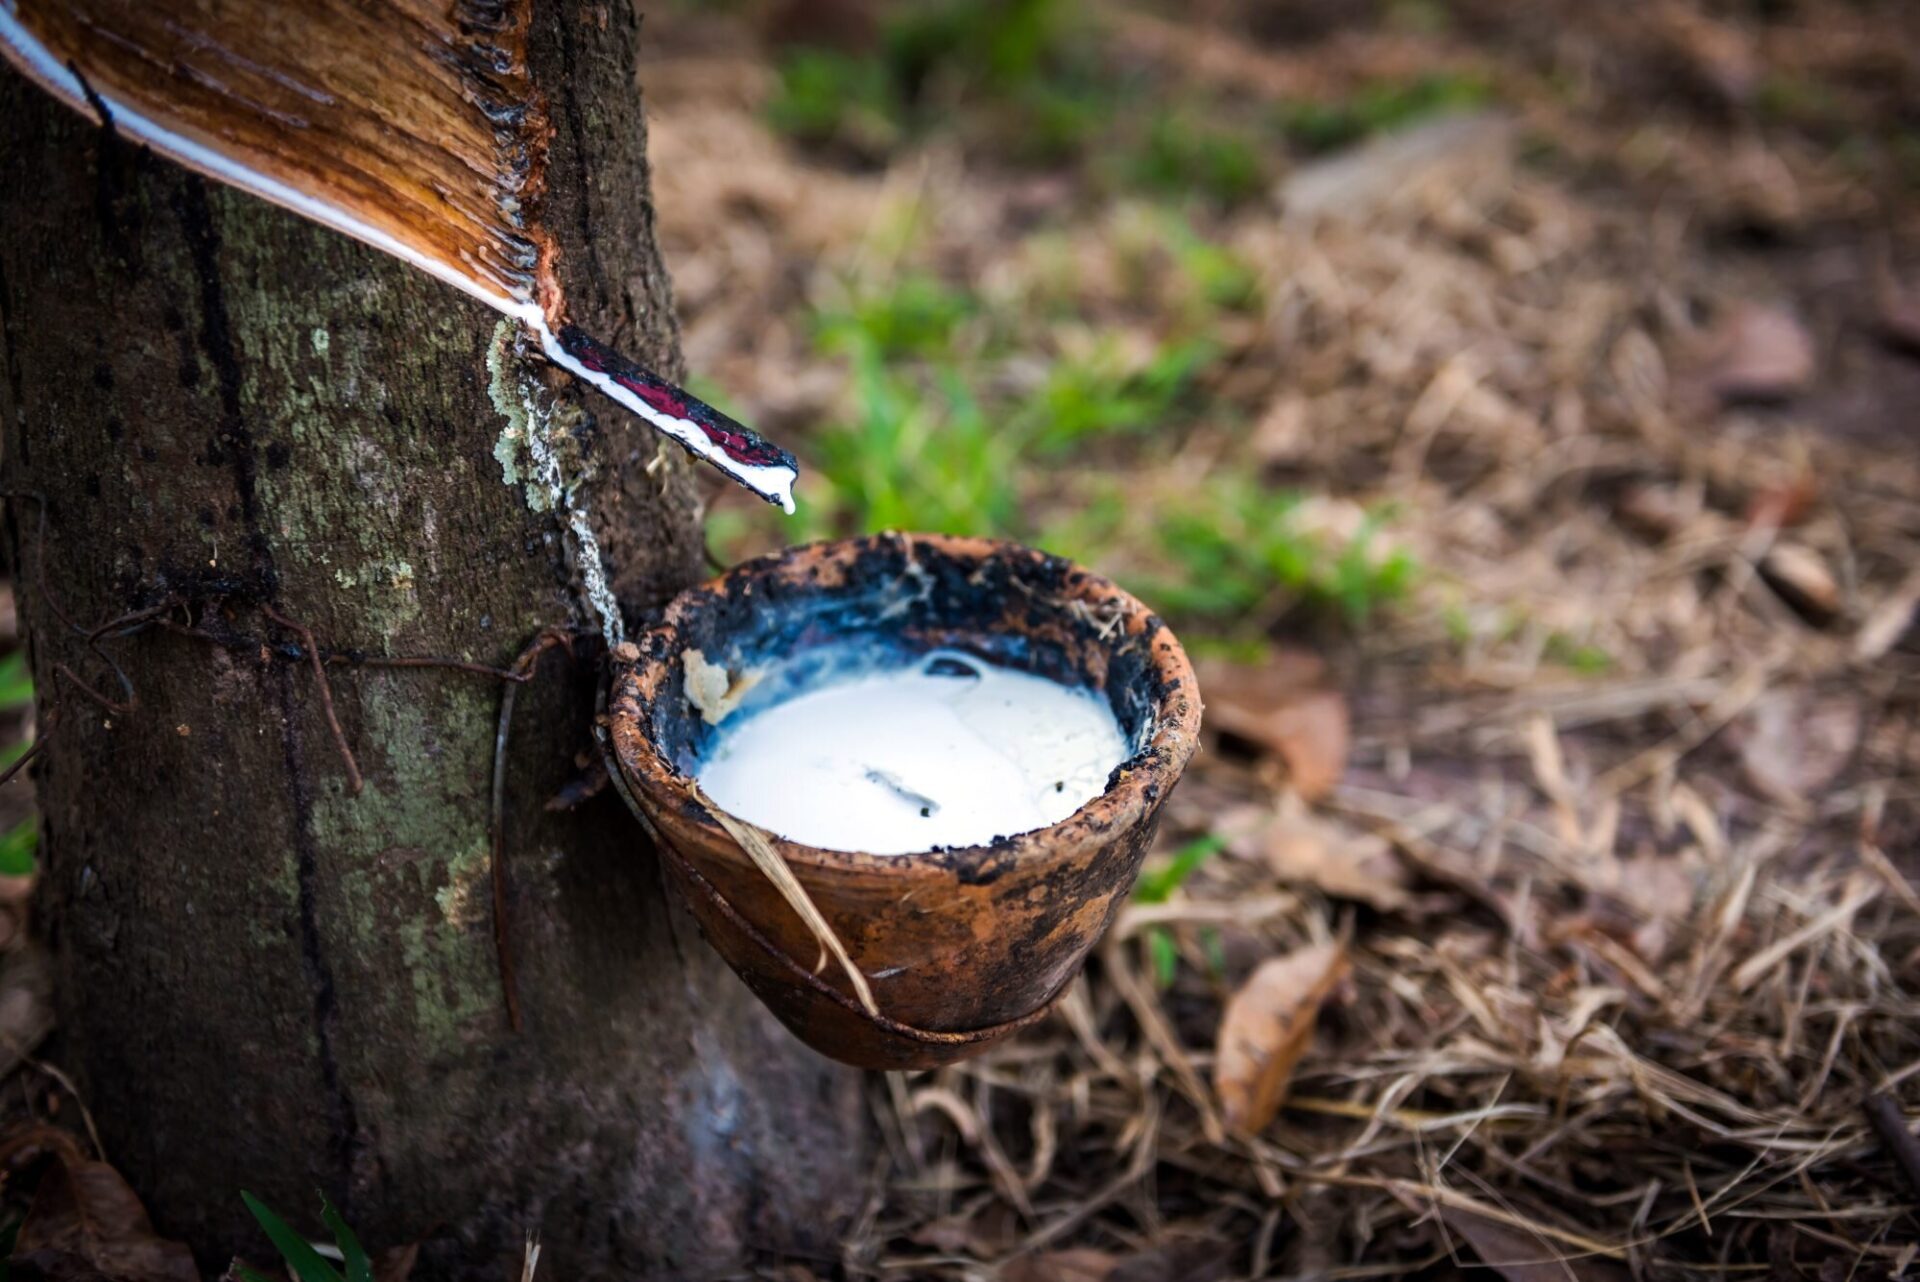 Rubber being ‘tapped’ the traditional way by cutting the bark of the rubber tree, allowing the rubber sap to drain into a receptacle.